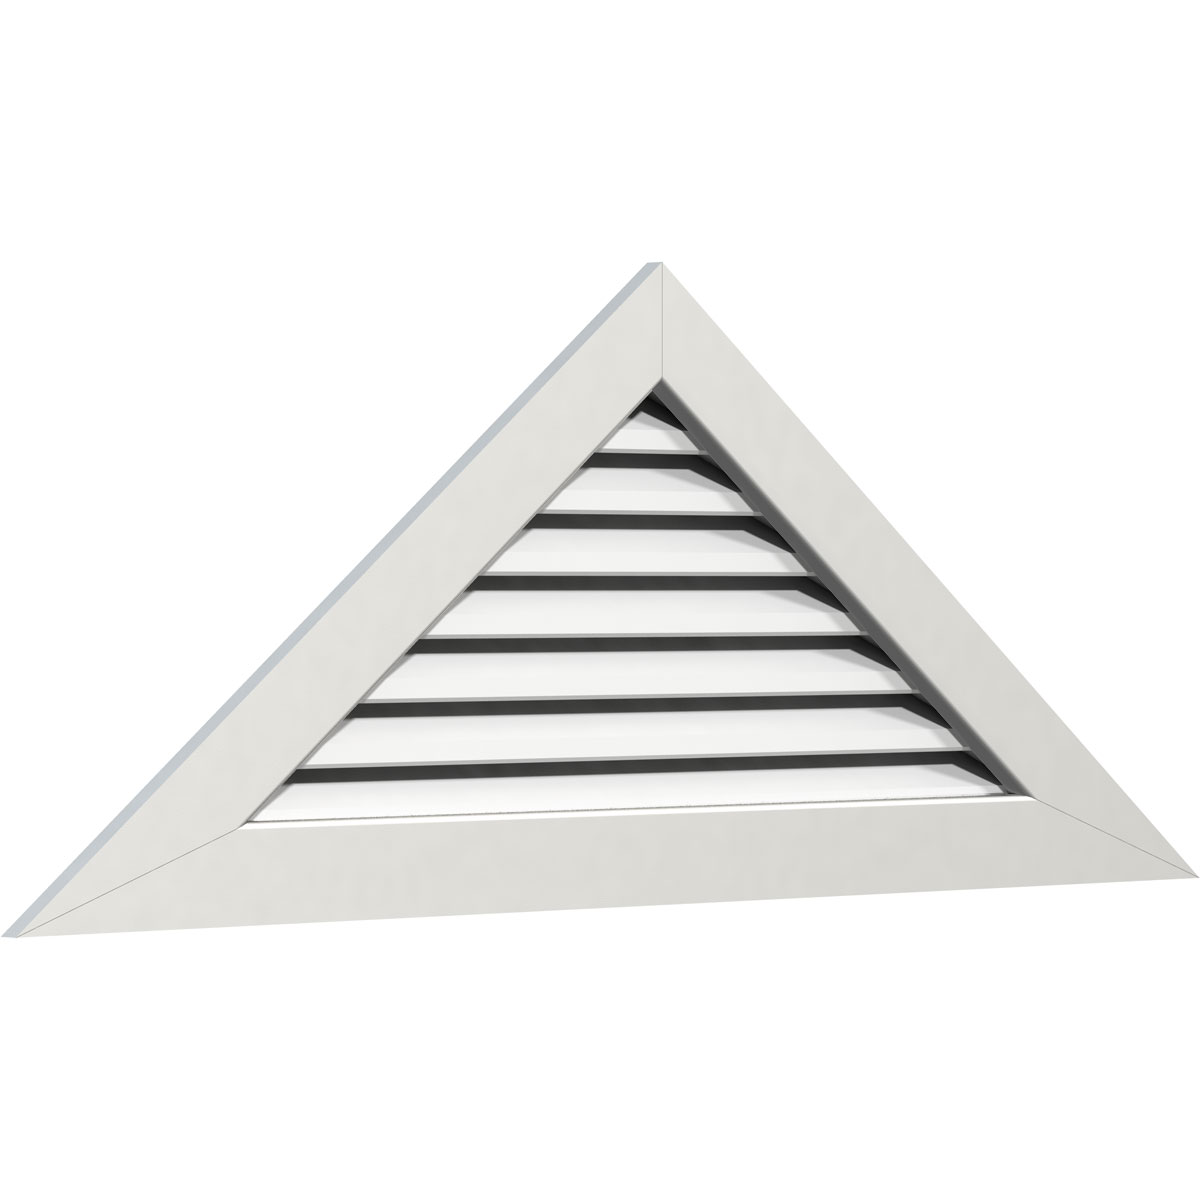 Ekena Millwork 36"W x 15"H Triangle Gable Vent (49 3/4"W x 20 3/4"H Frame Size) 10/12 Pitch Functional, PVC Gable Vent with 1" x 4" Flat Trim Frame - image 2 of 14